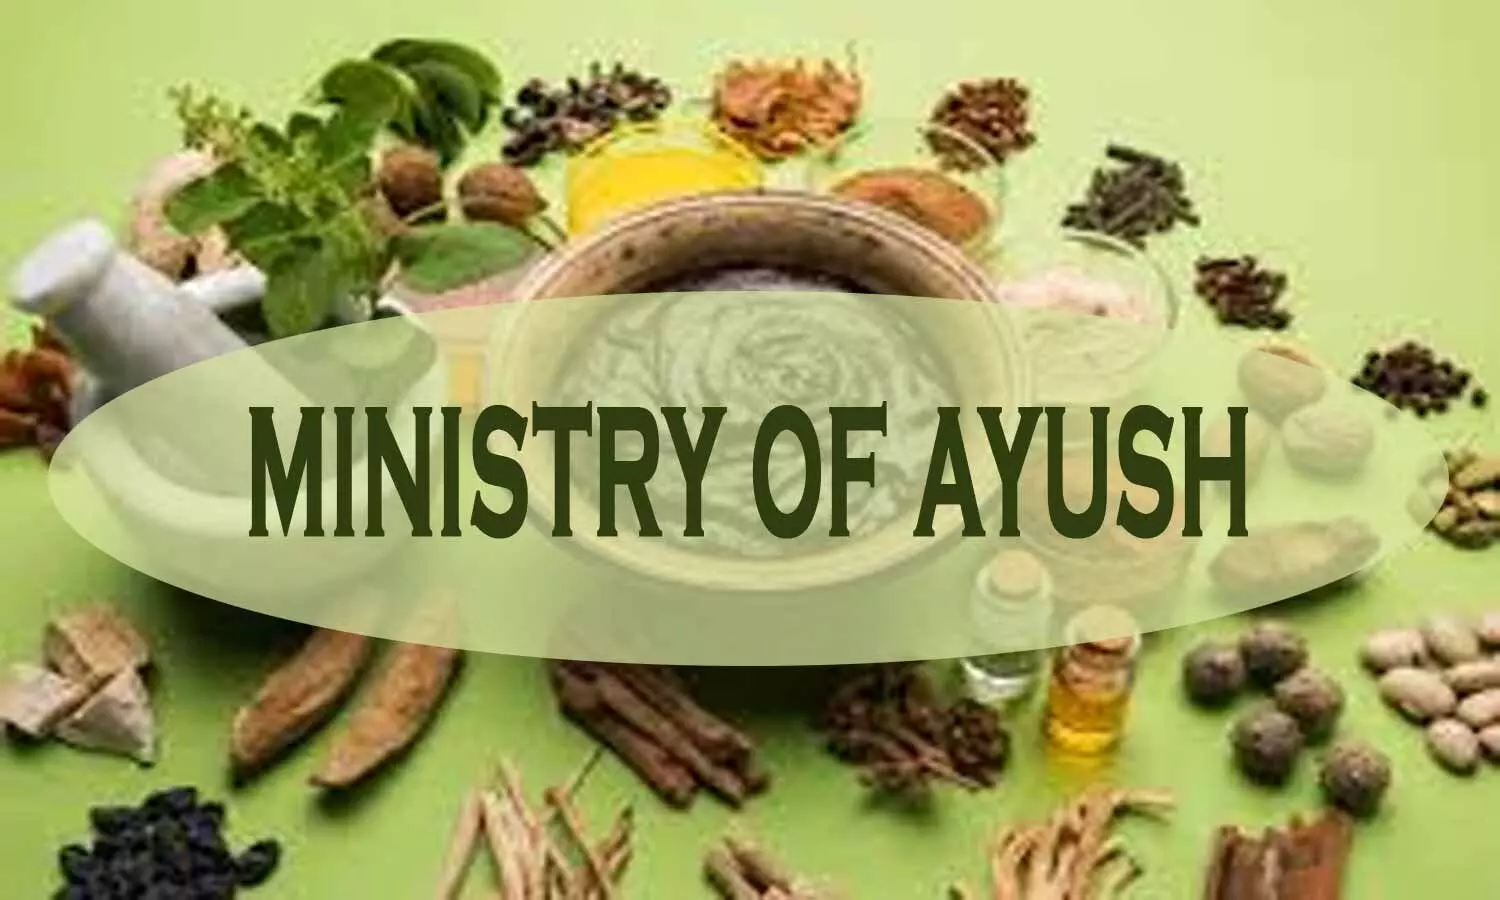 78 Ayush doctors promoted to post of chief medical officers in senior administrative grade